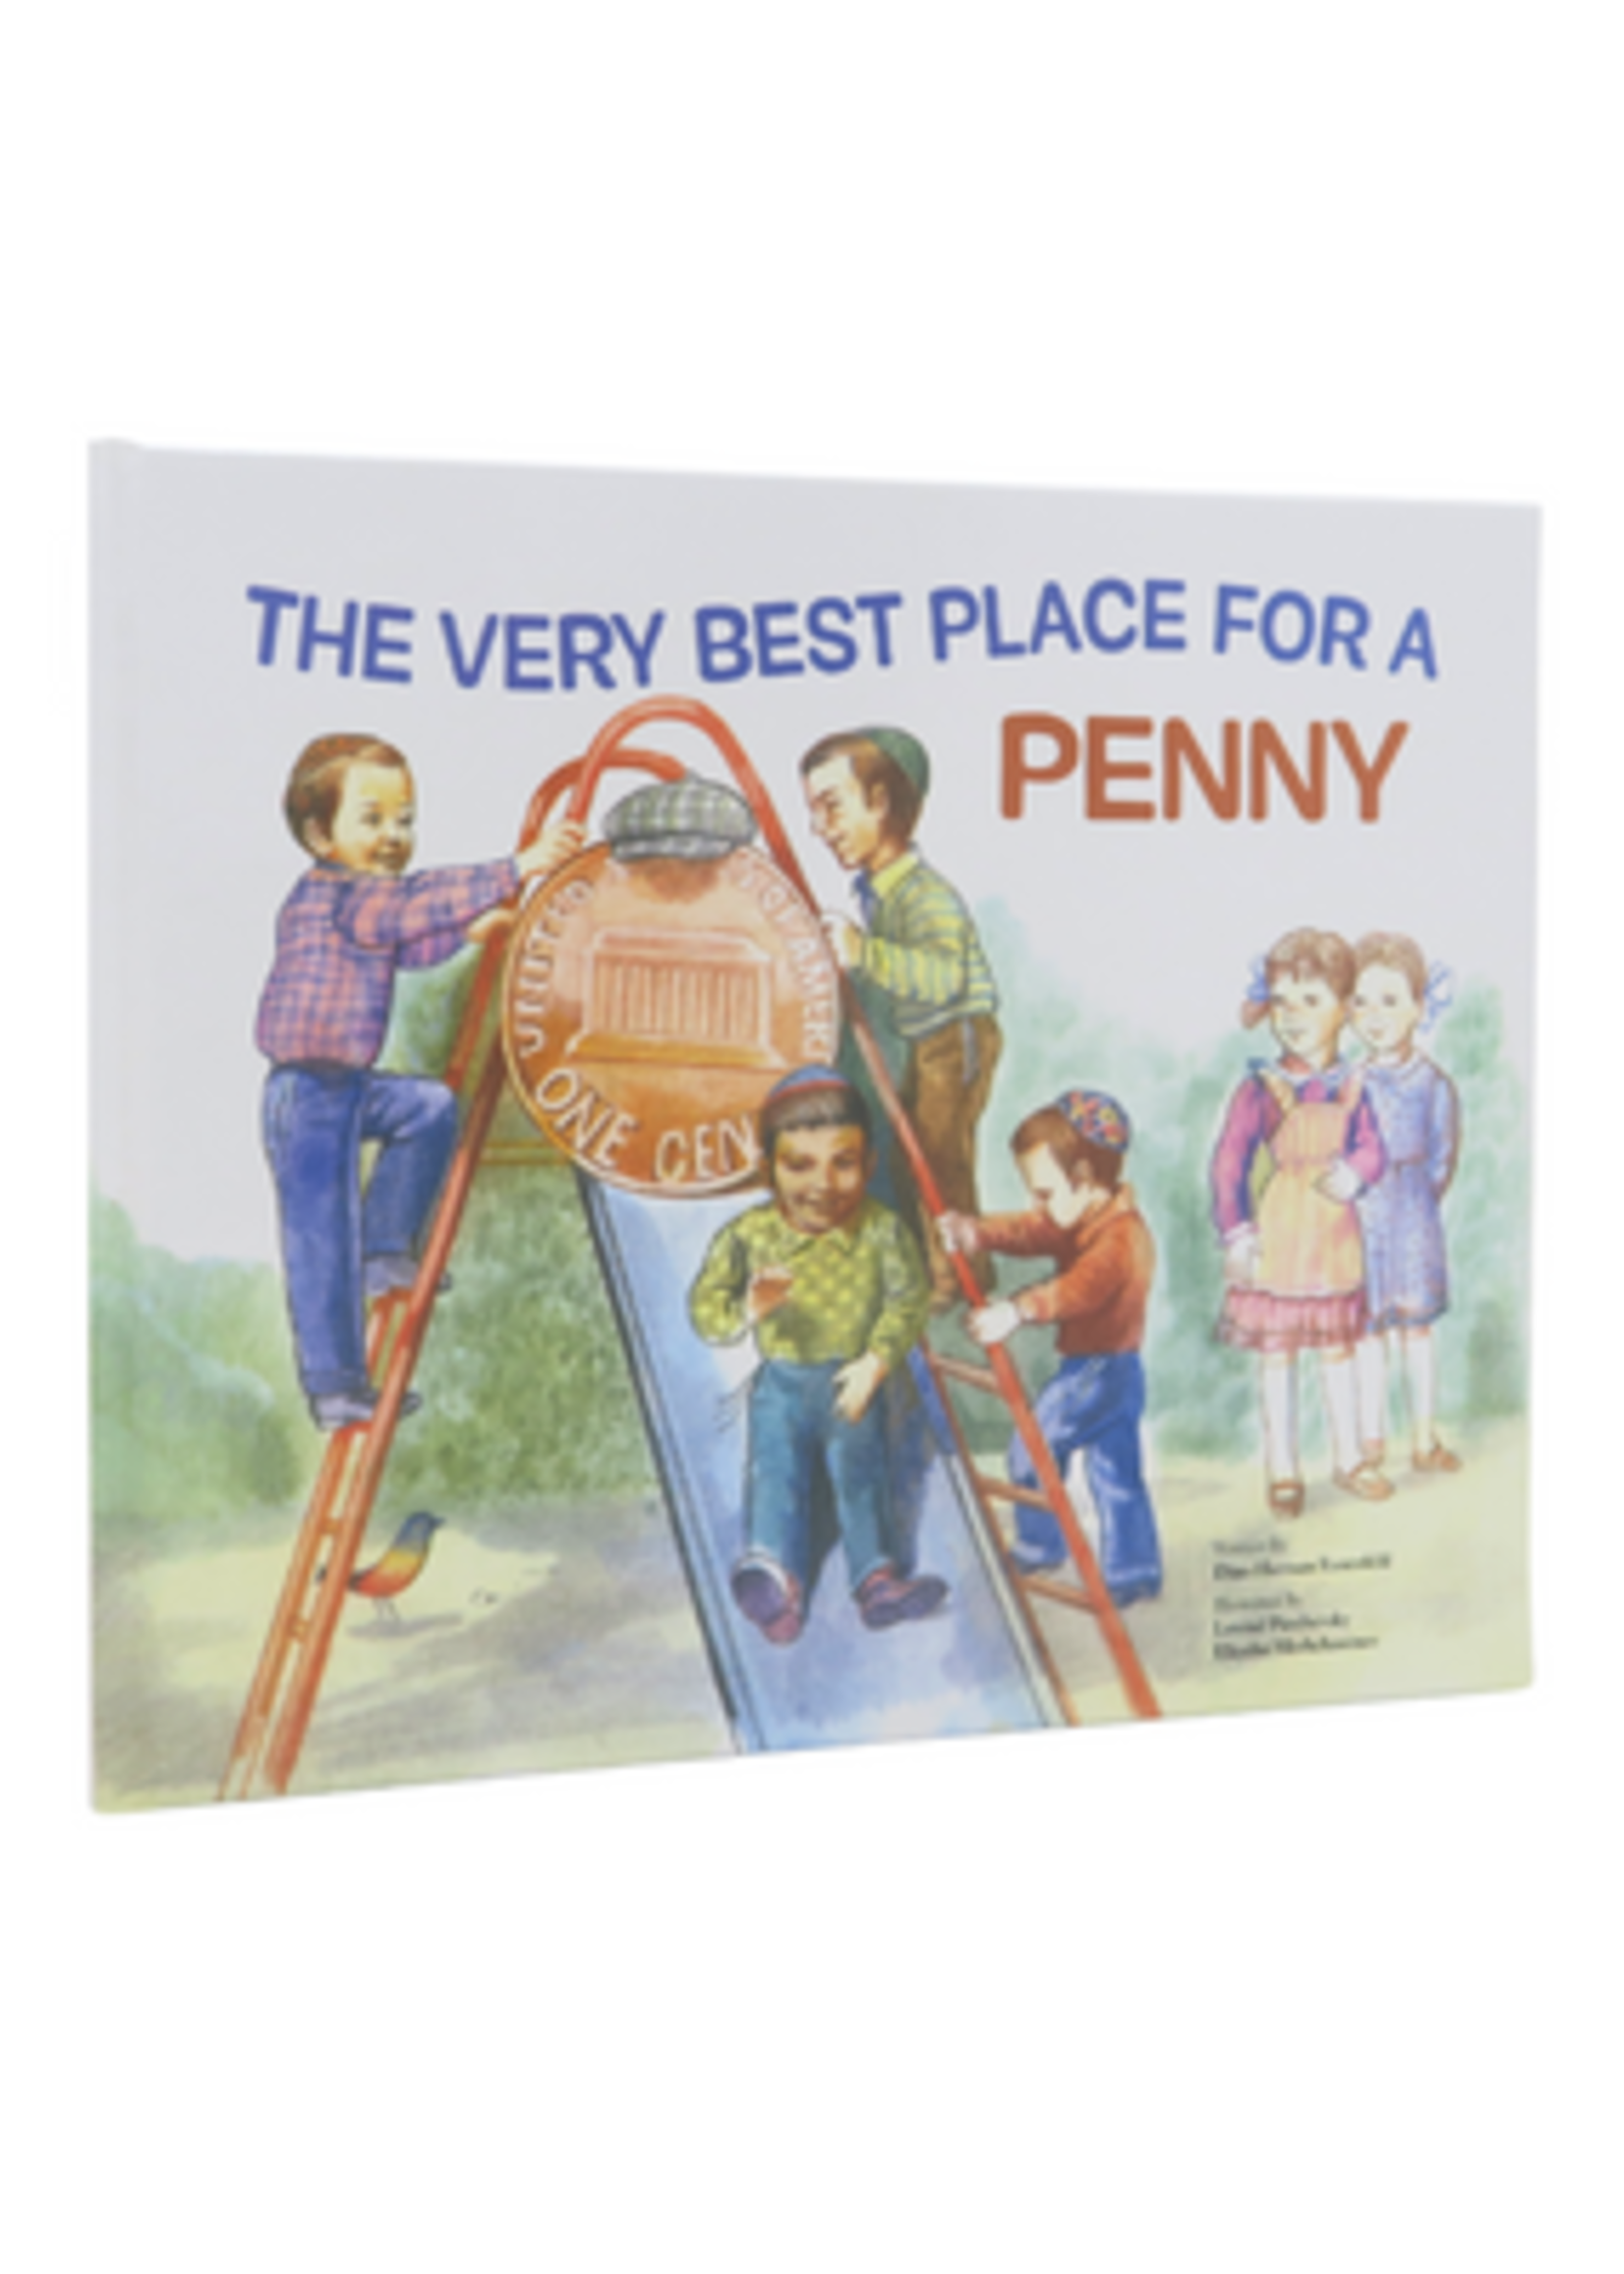 THE VERY BEST PLACE FOR A PENNY